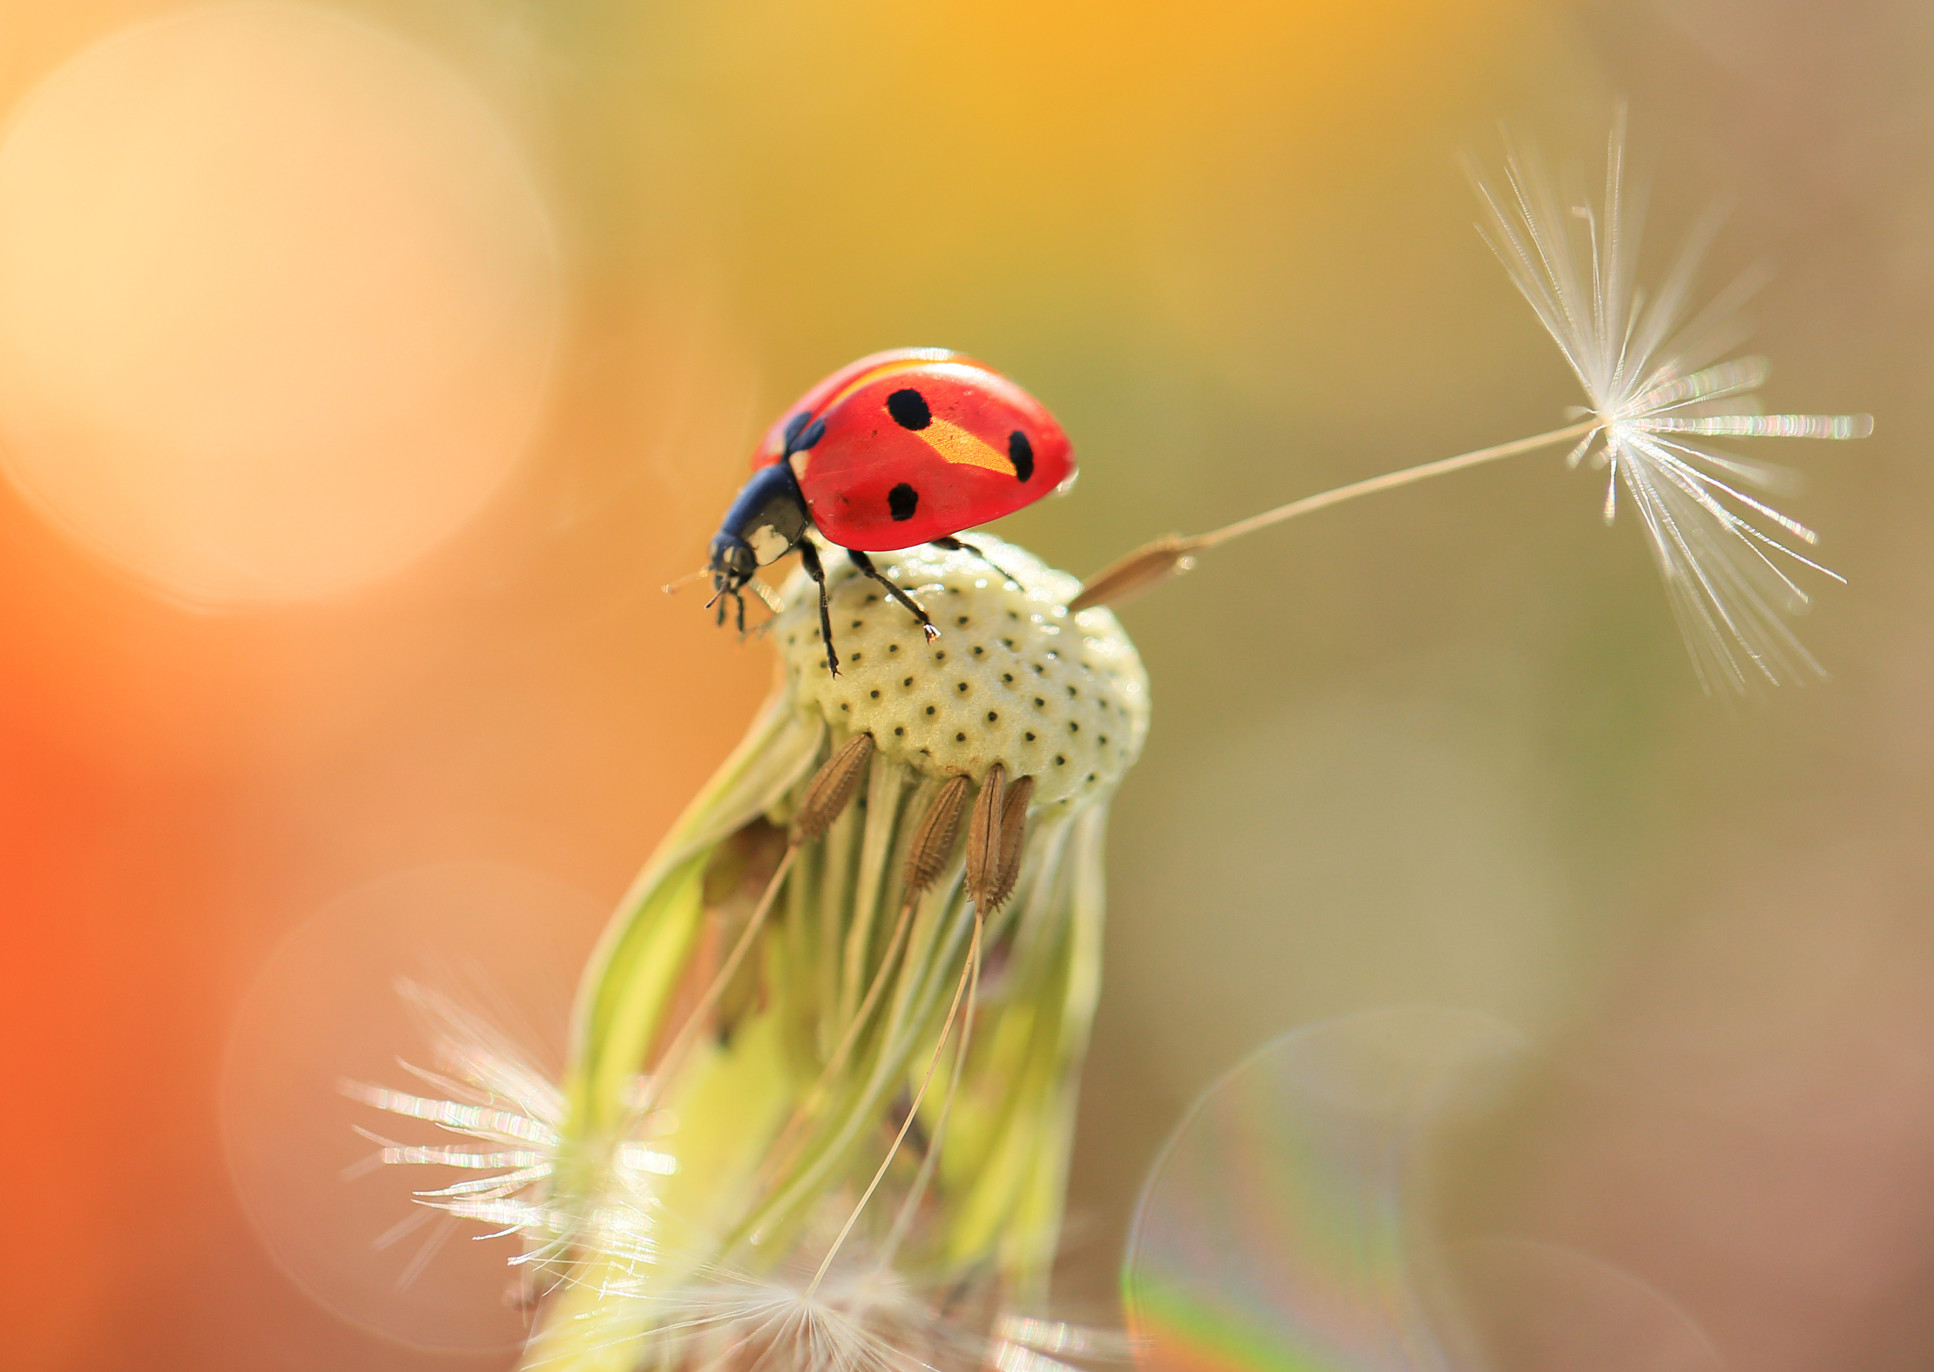 Photo of a ladybird on top of a dandelion head with most of the seeds gone. One seed remains so that you can clearly see how it is attached to its parachute.